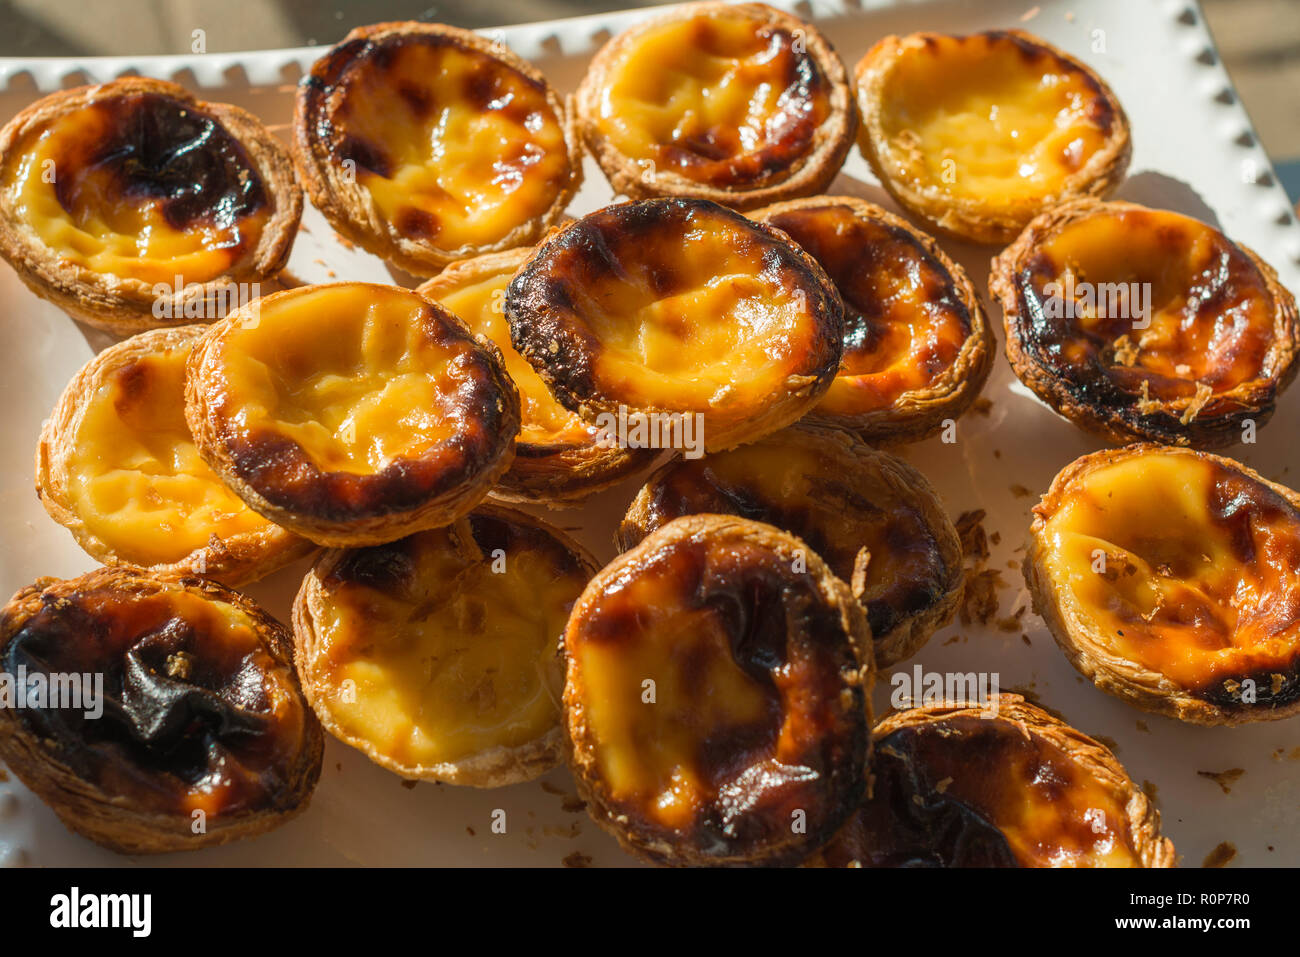 Pastel de nata is a Portuguese egg tart pastry dusted with cinnamon. Stock Photo